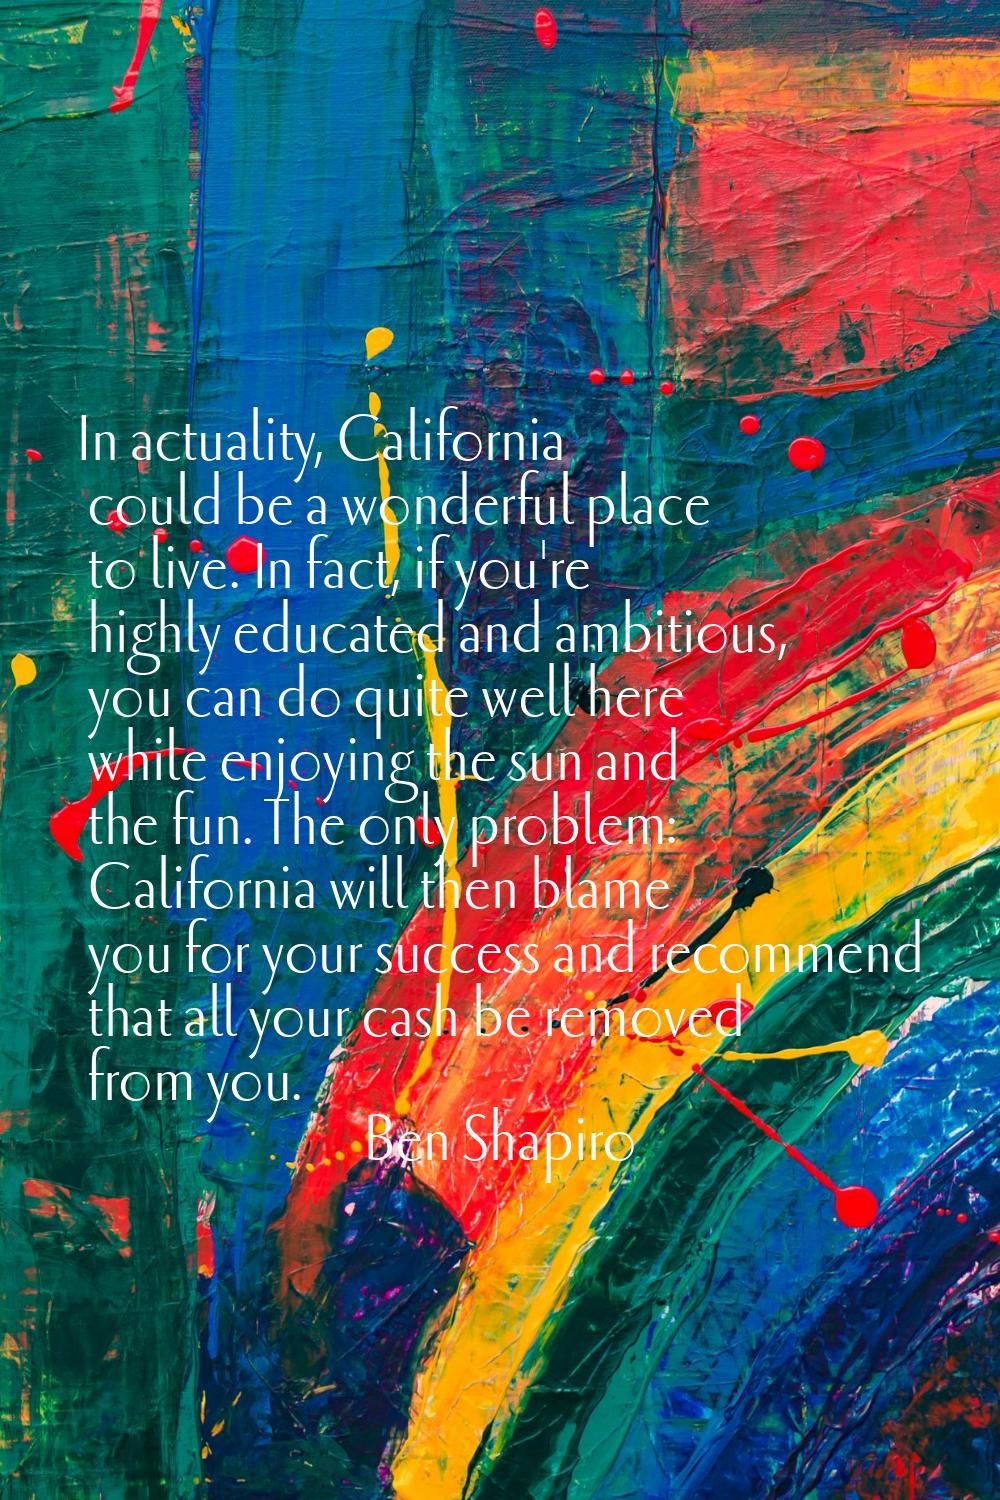 In actuality, California could be a wonderful place to live. In fact, if you're highly educated and